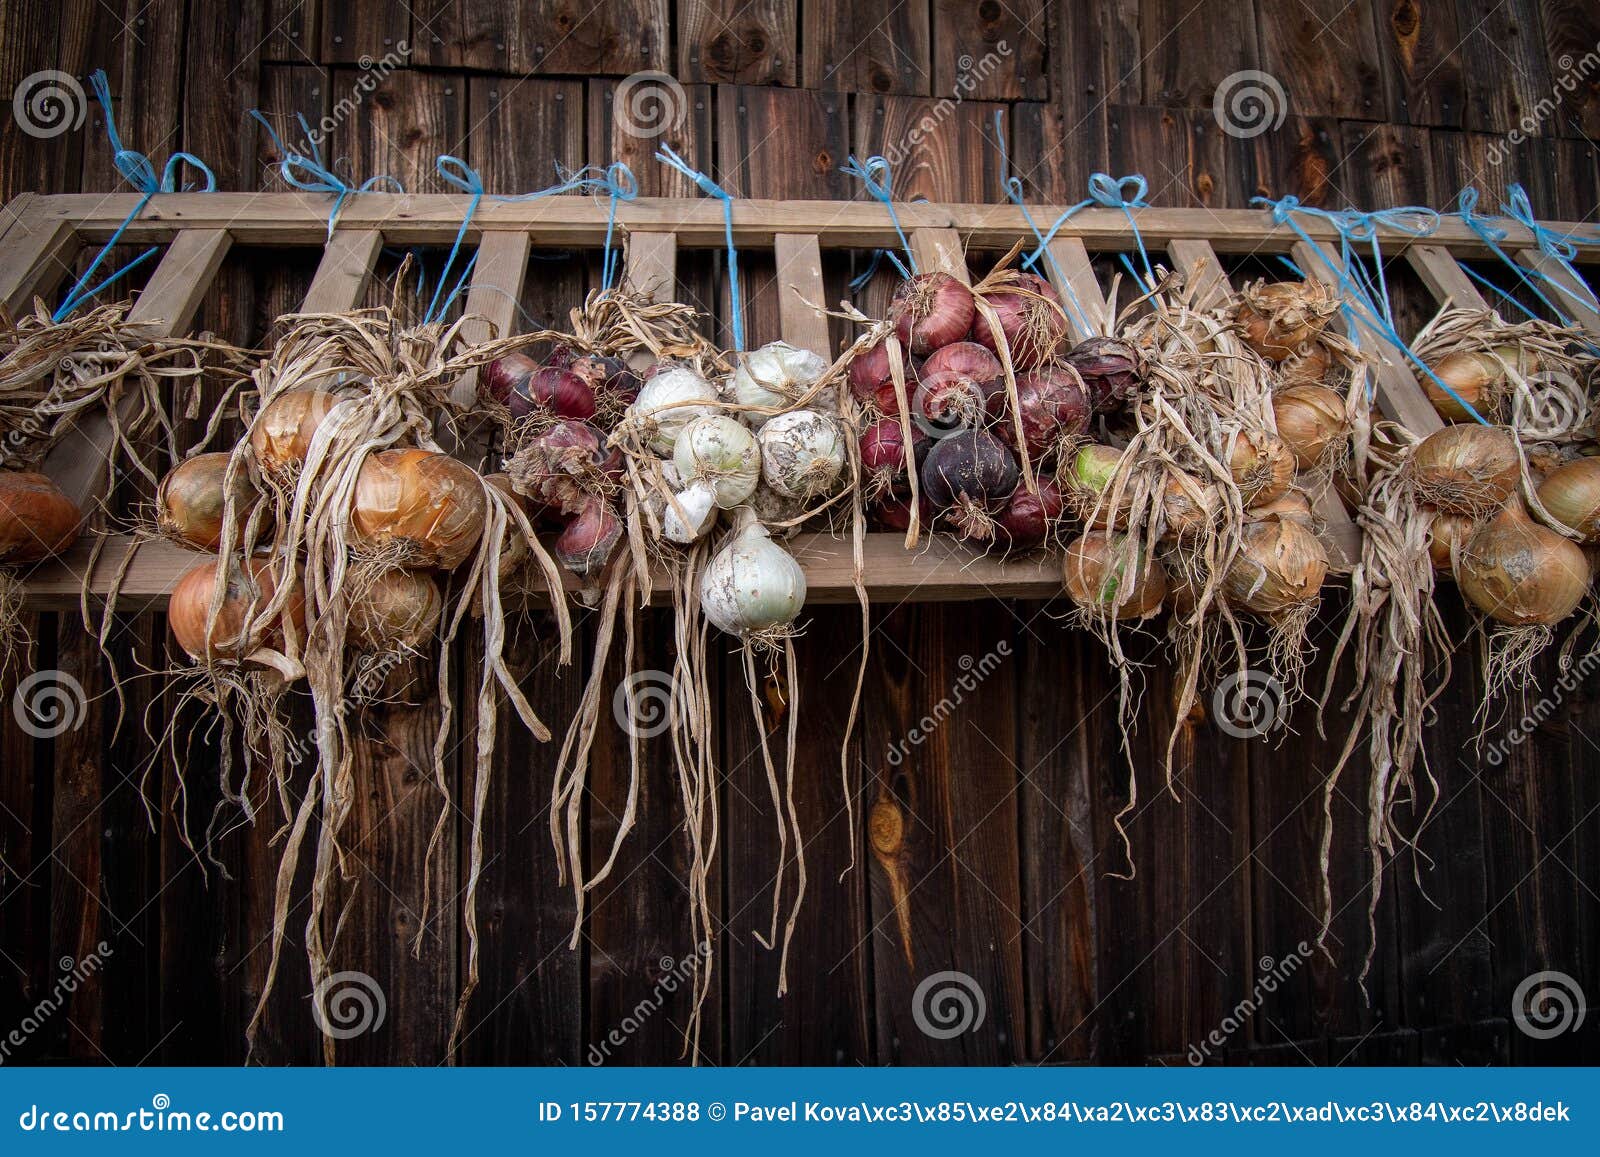 drying onions of different colors infront of barn